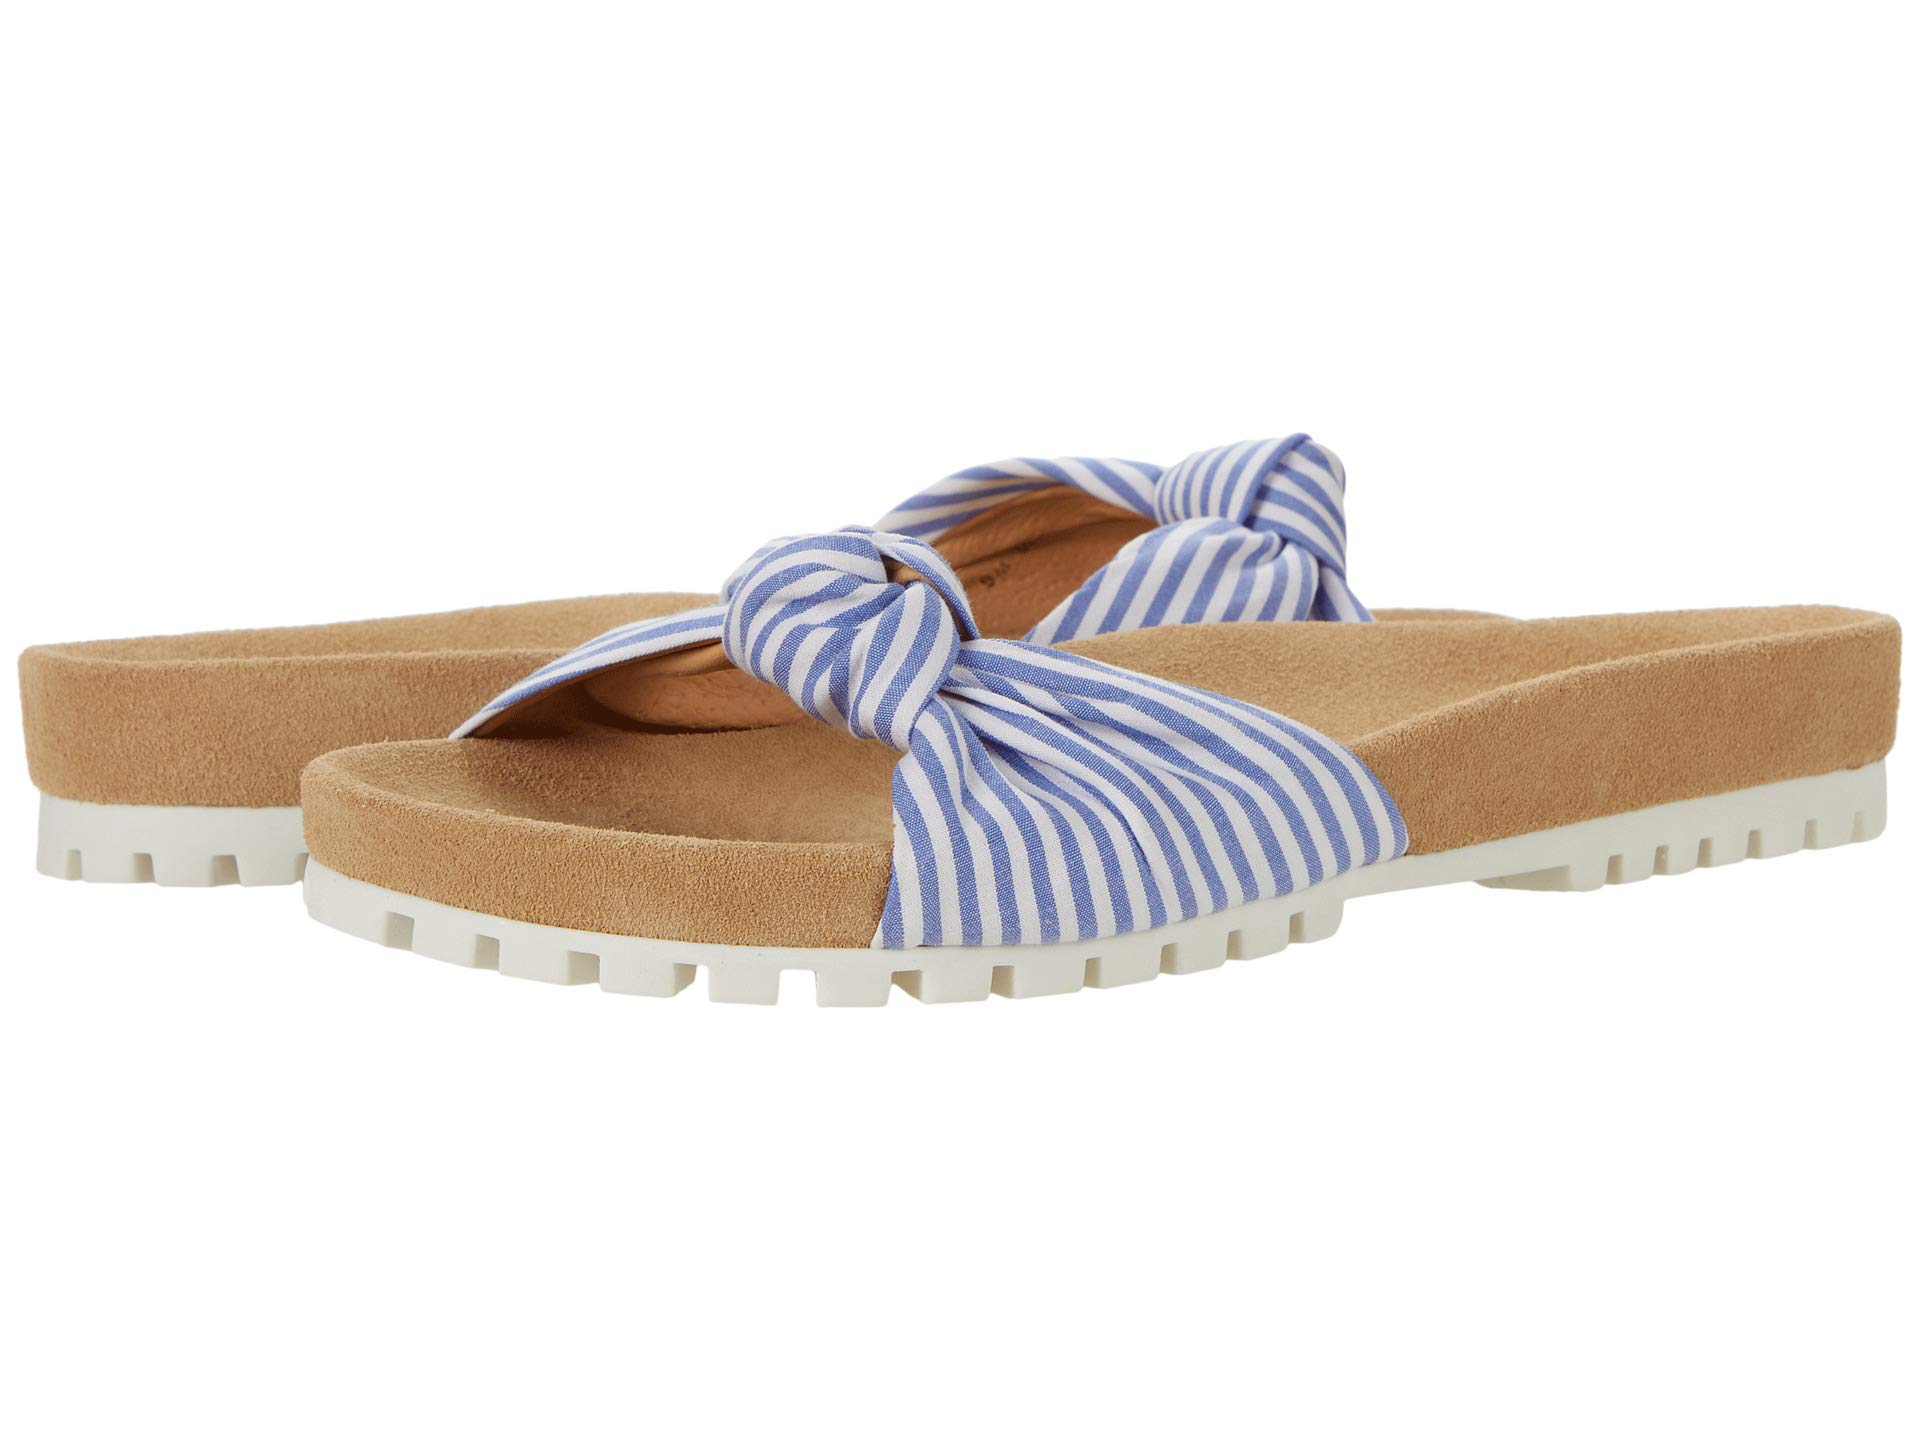 Шлепанцы Jack Rogers, Phoebe Knotted Comfort Slide